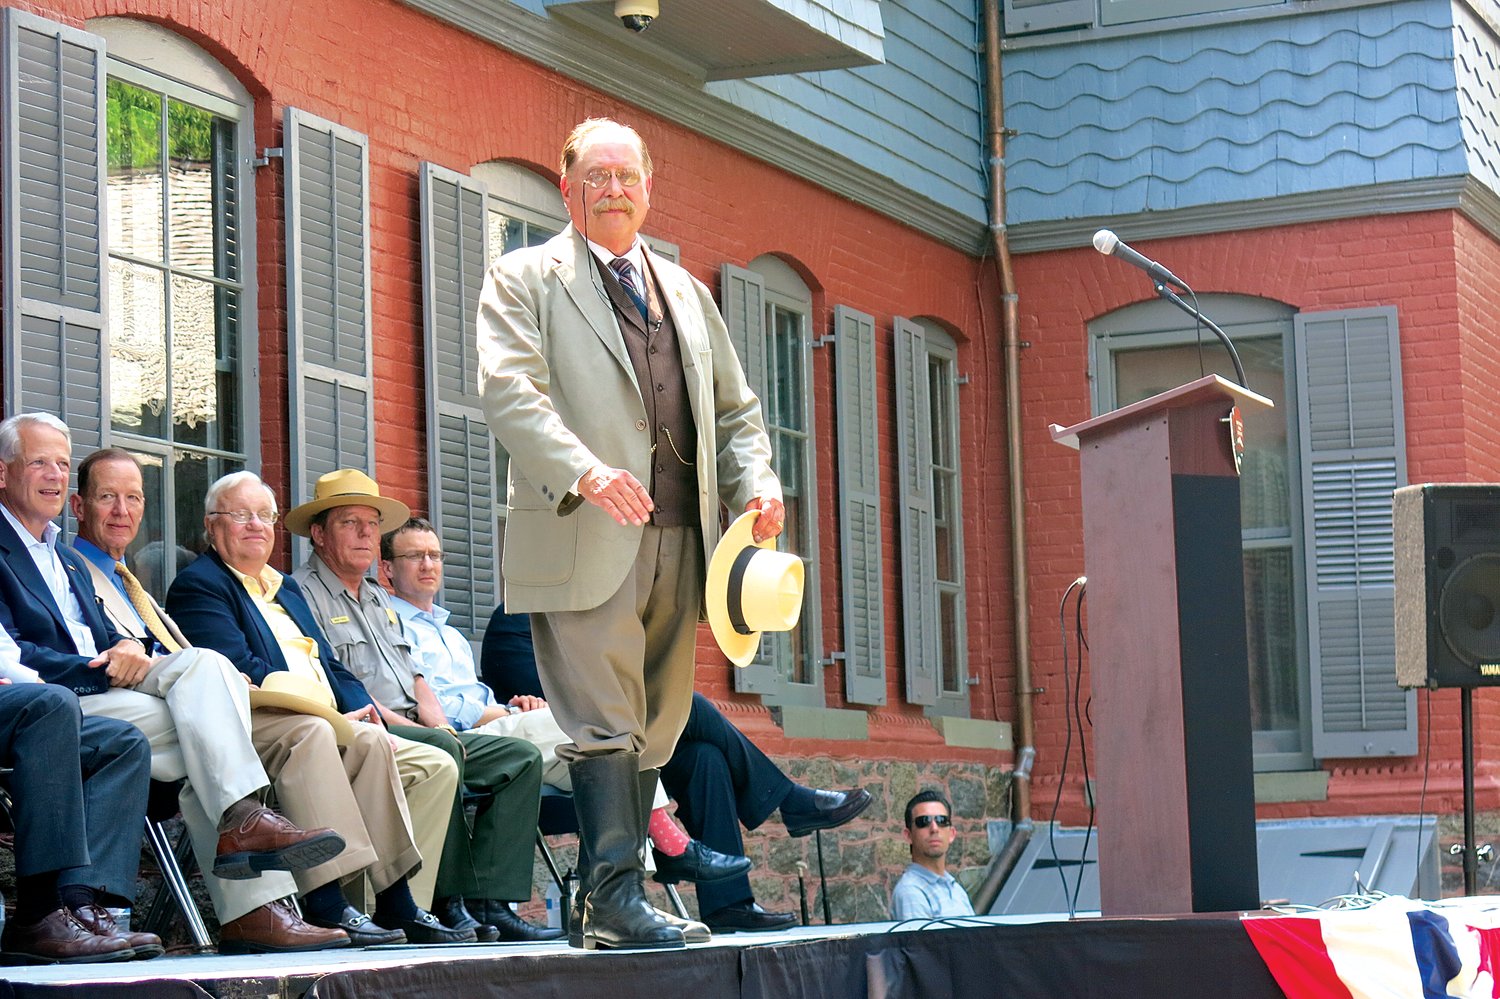 James Foote shared one of T.R.’s speeches at the reopening of Sagamore Hill in July 2015.